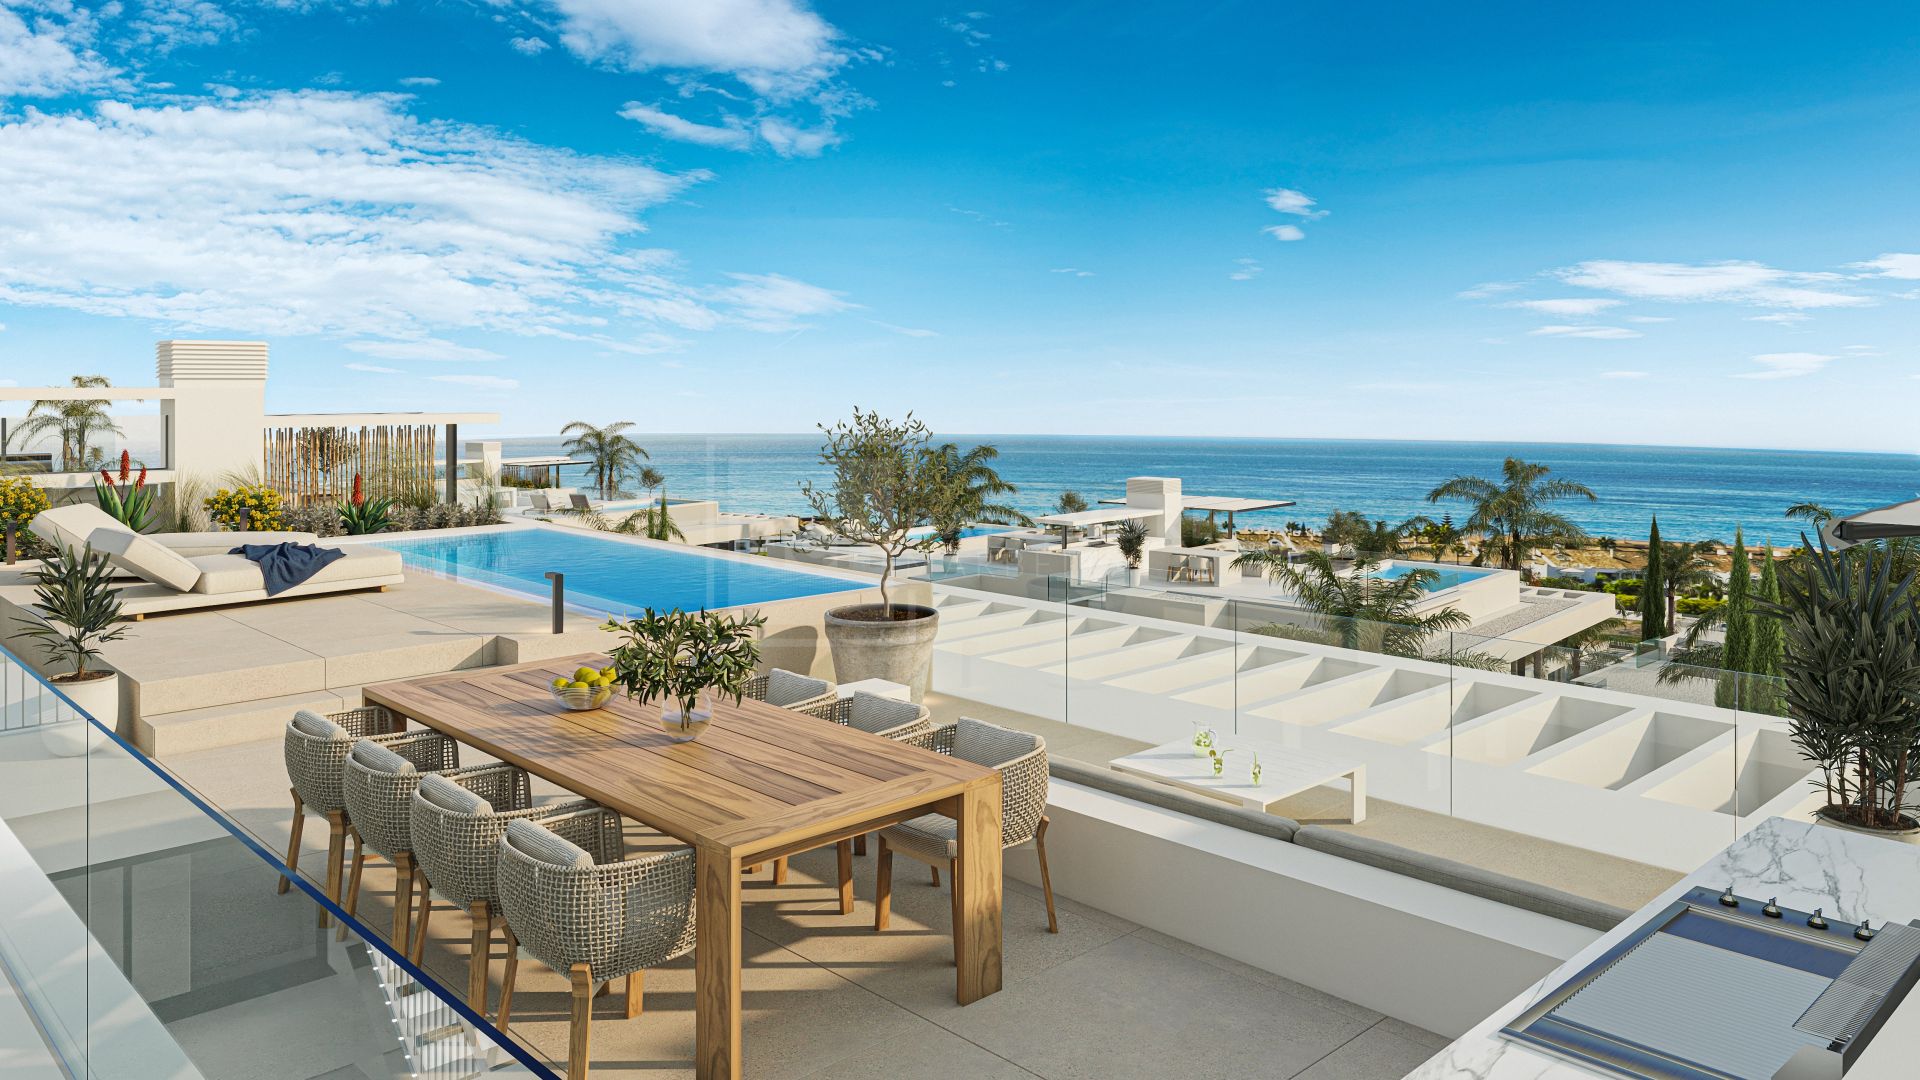 STUNNING BRAND NEW 3-BEDROOM CONTEMPORARY APARTMENT WITH SEA VIEWS EAST OF MARBELLA